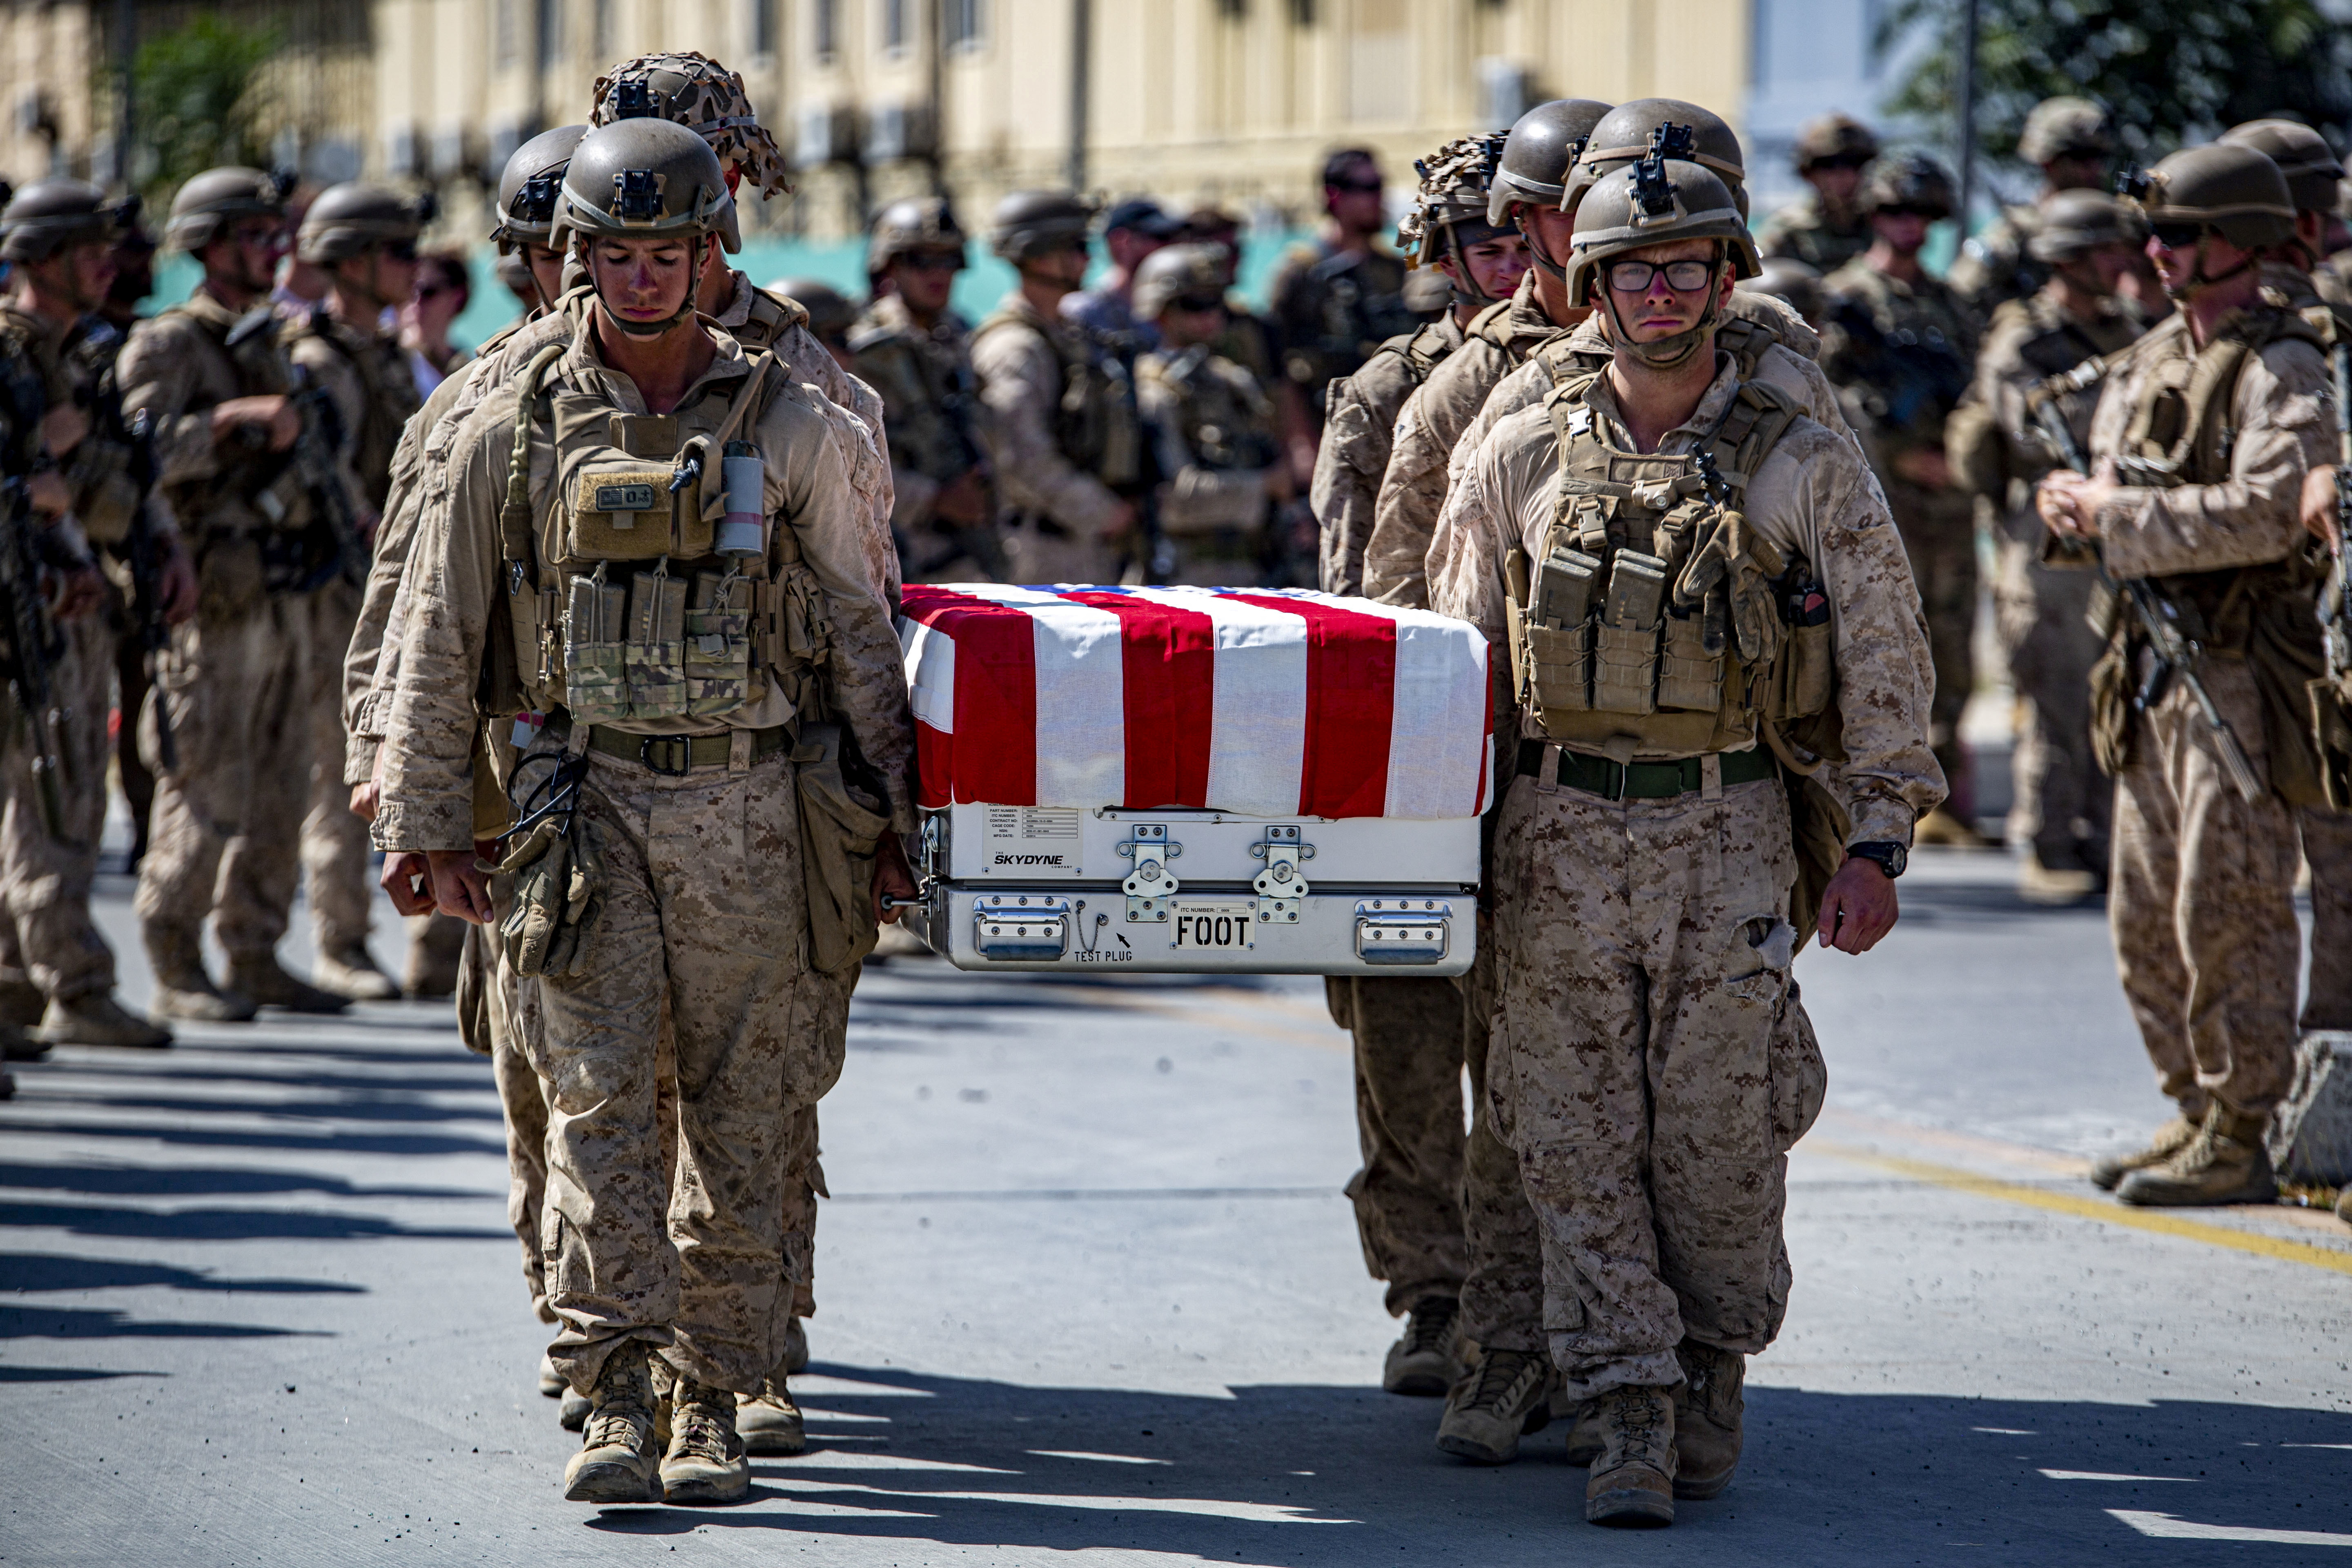 U.S. service members act as pallbearers for the service members killed in action in Kabul